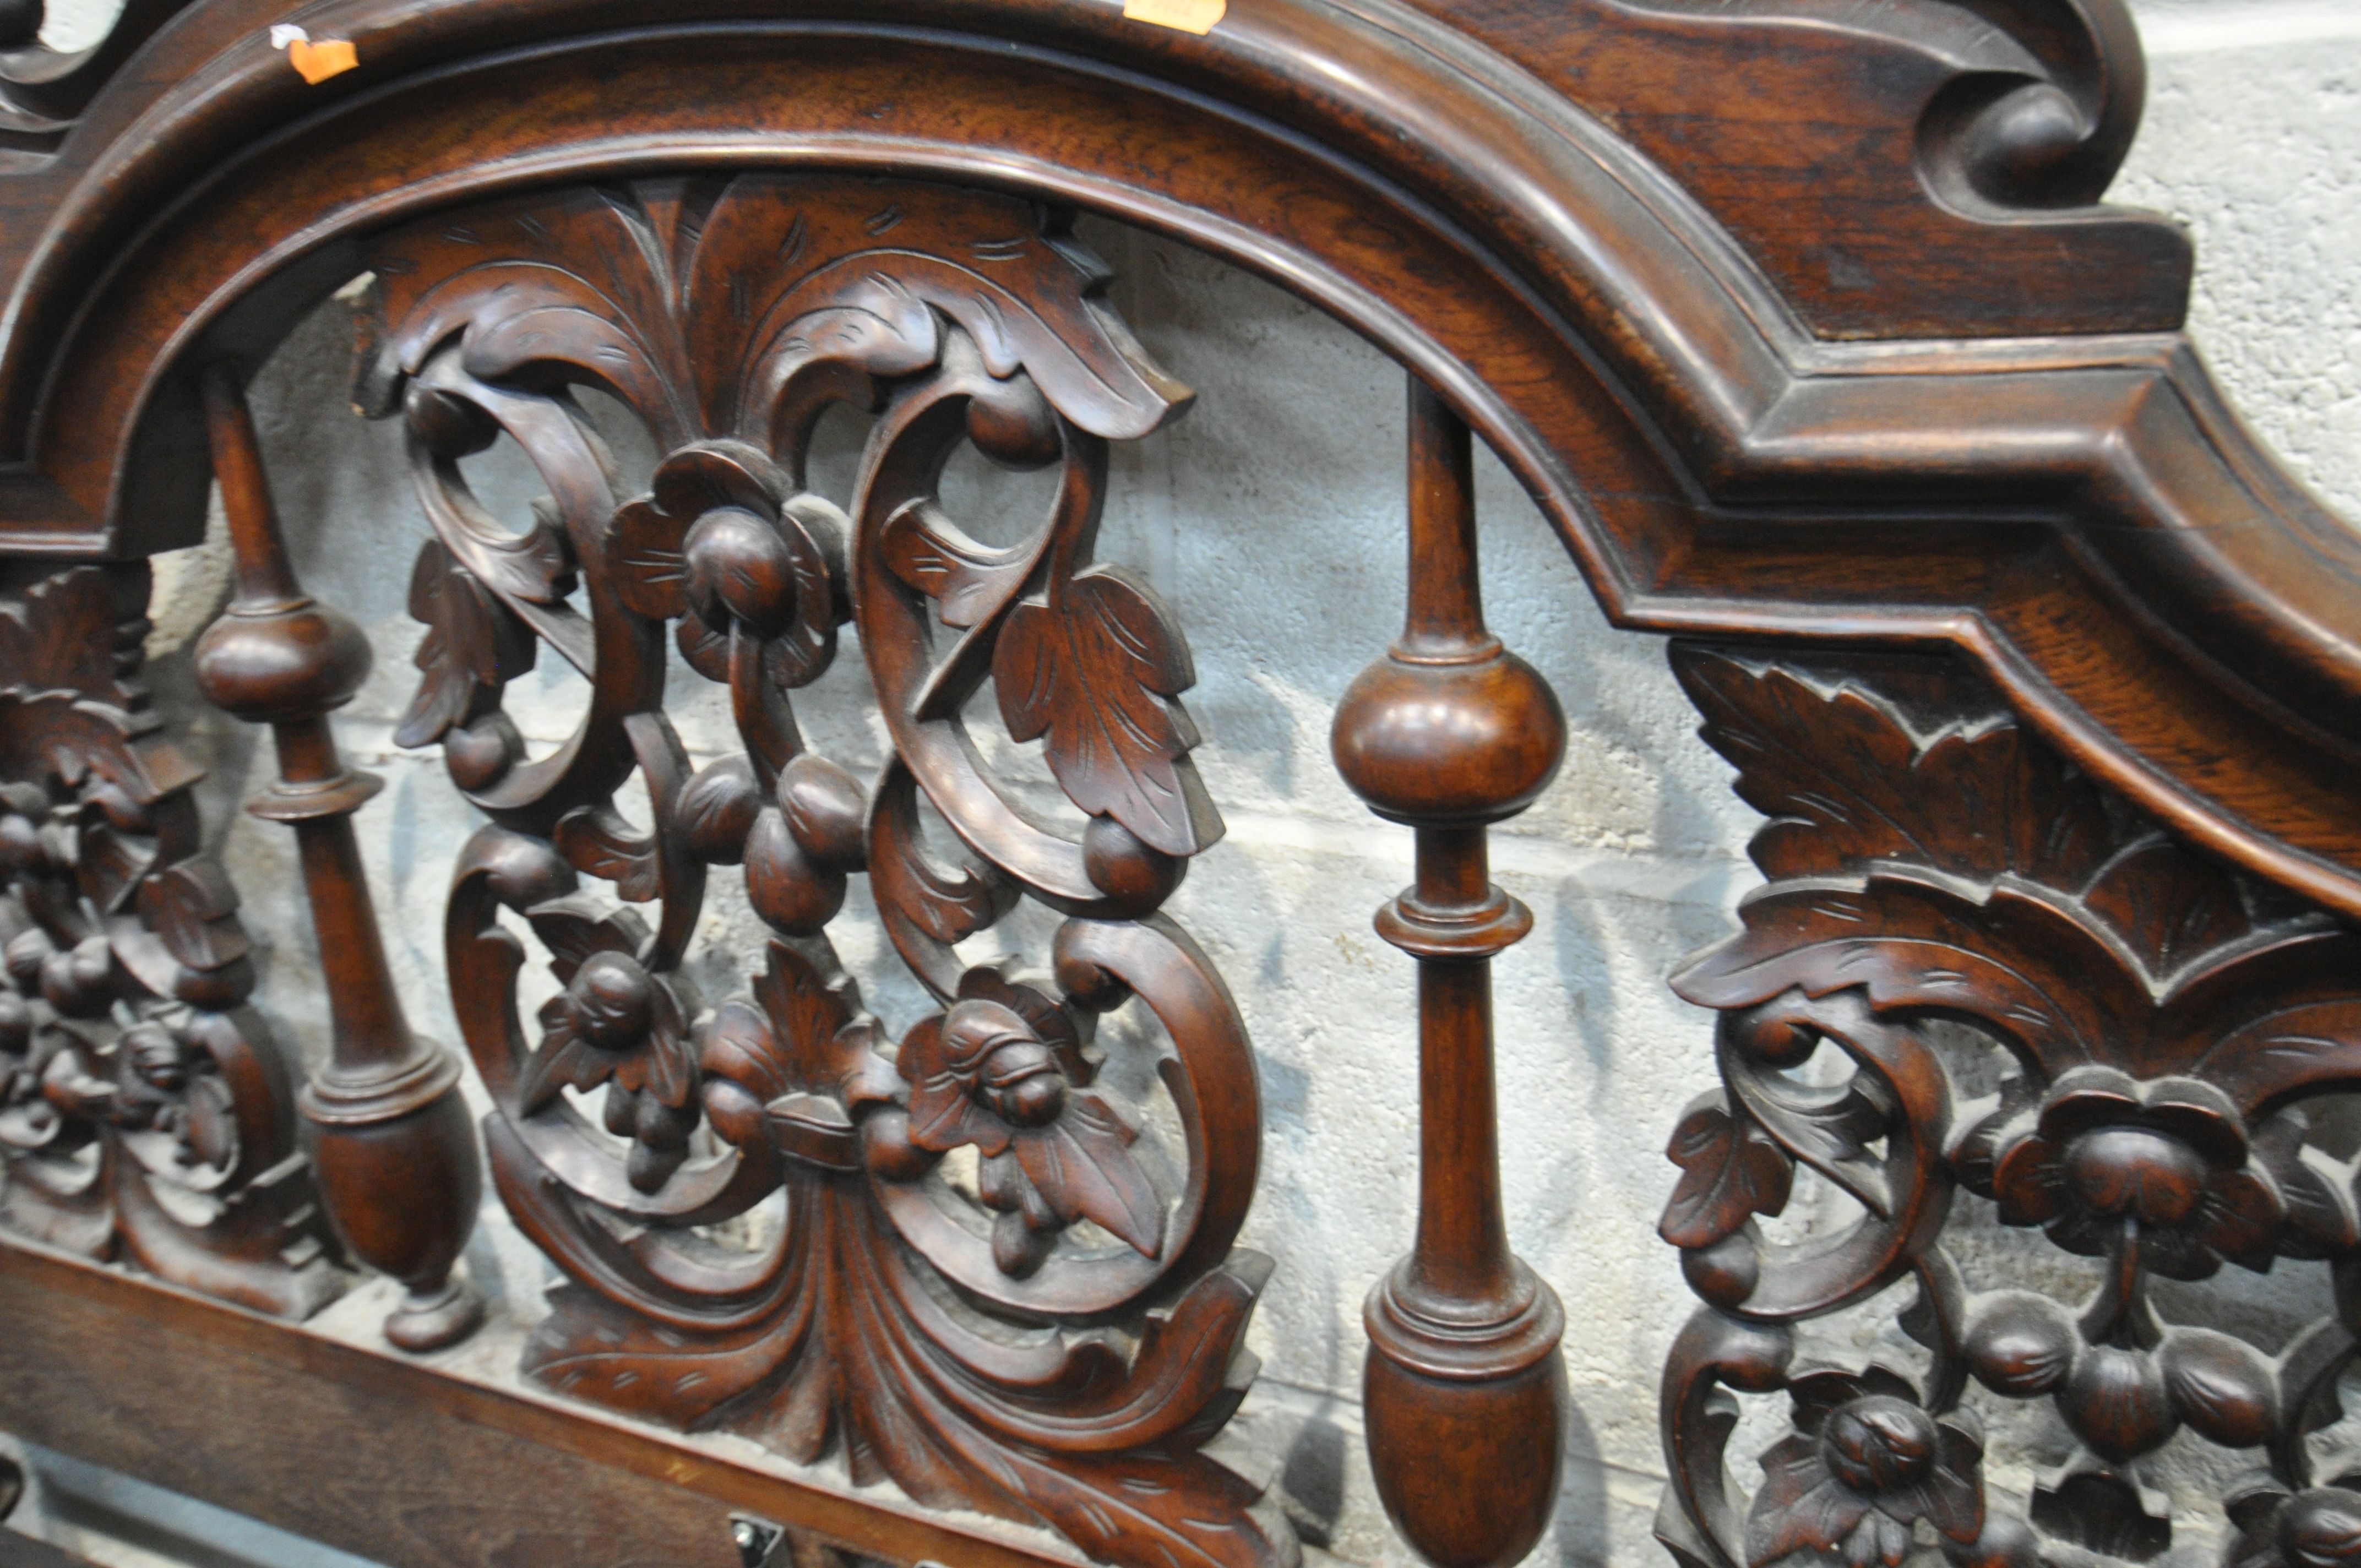 AN 18TH CENTURY OAK AND MAHOGANY 4FT6 FOUR POSTER BED, having a foliate open fretwork headboard, - Image 8 of 9